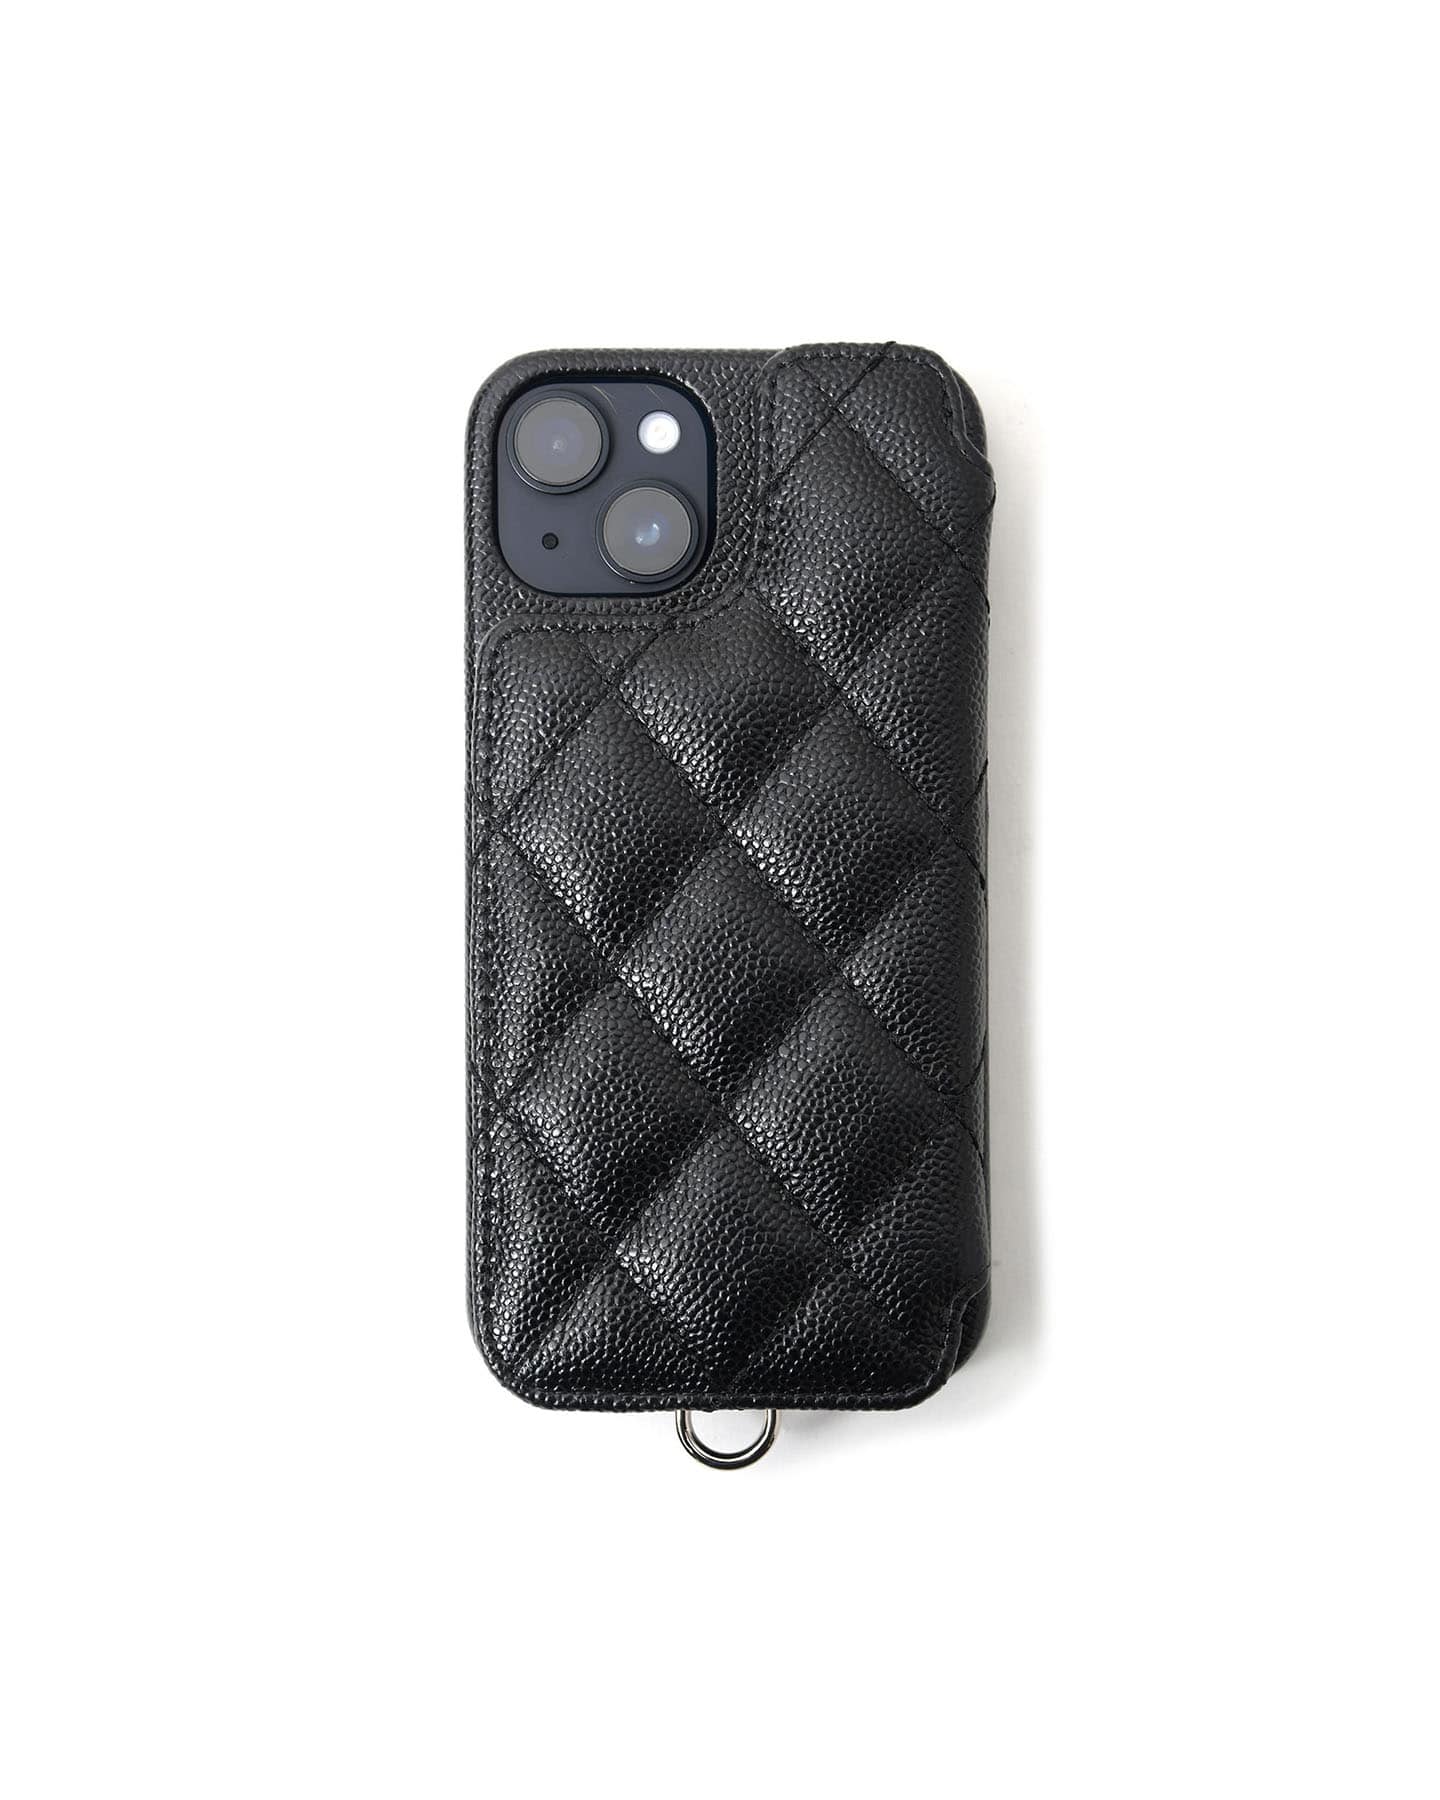 SOPH. | DEMIURVO LEATHER QUILTING PHONE CASE for iPhone(FREE A 